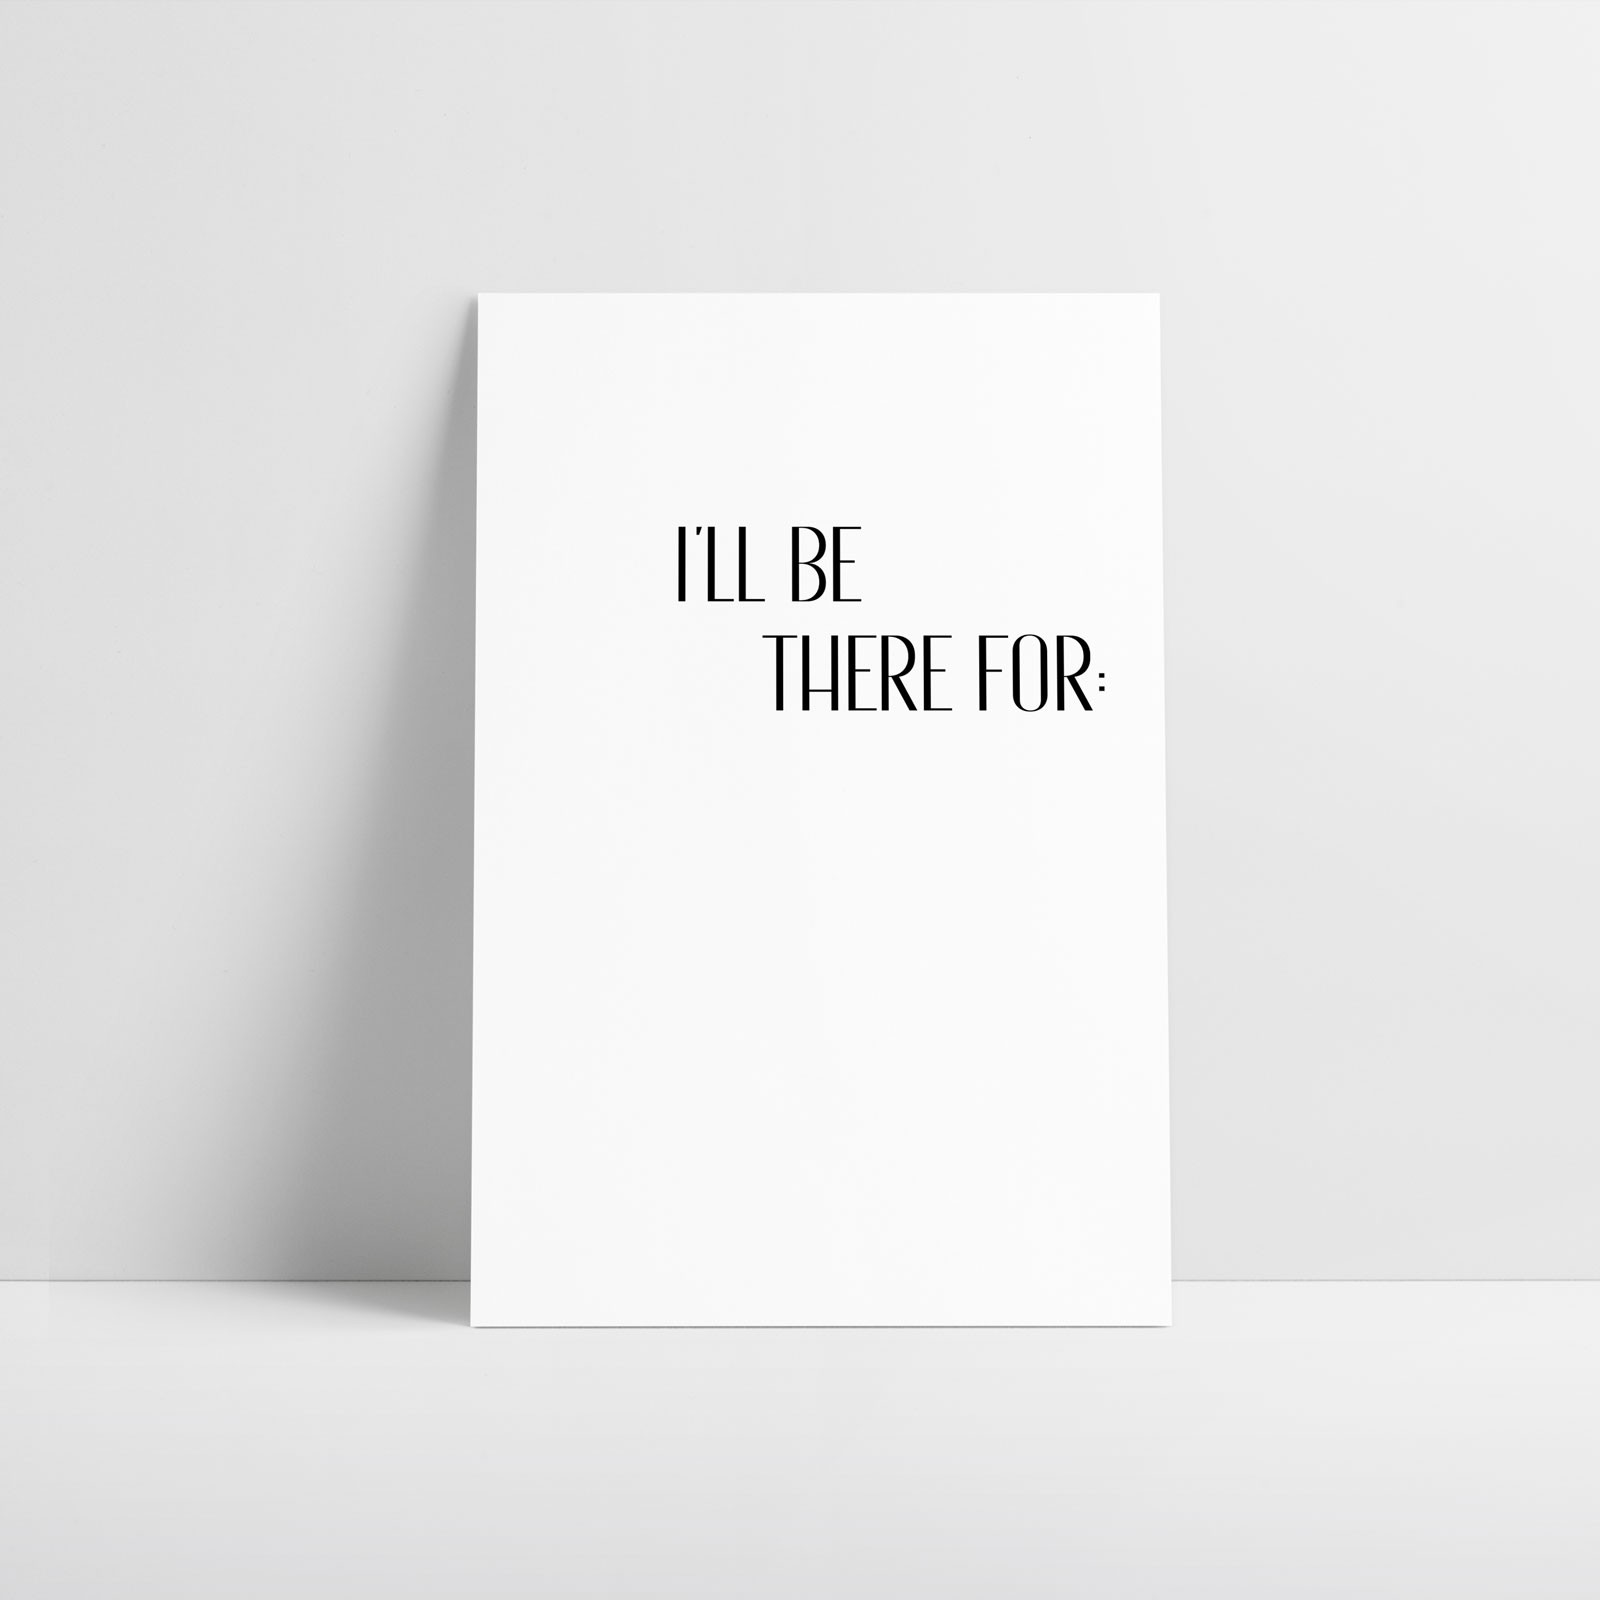 I'LL BE THERE - typography Design Art Poster Wall Art Prints Interior Decoration